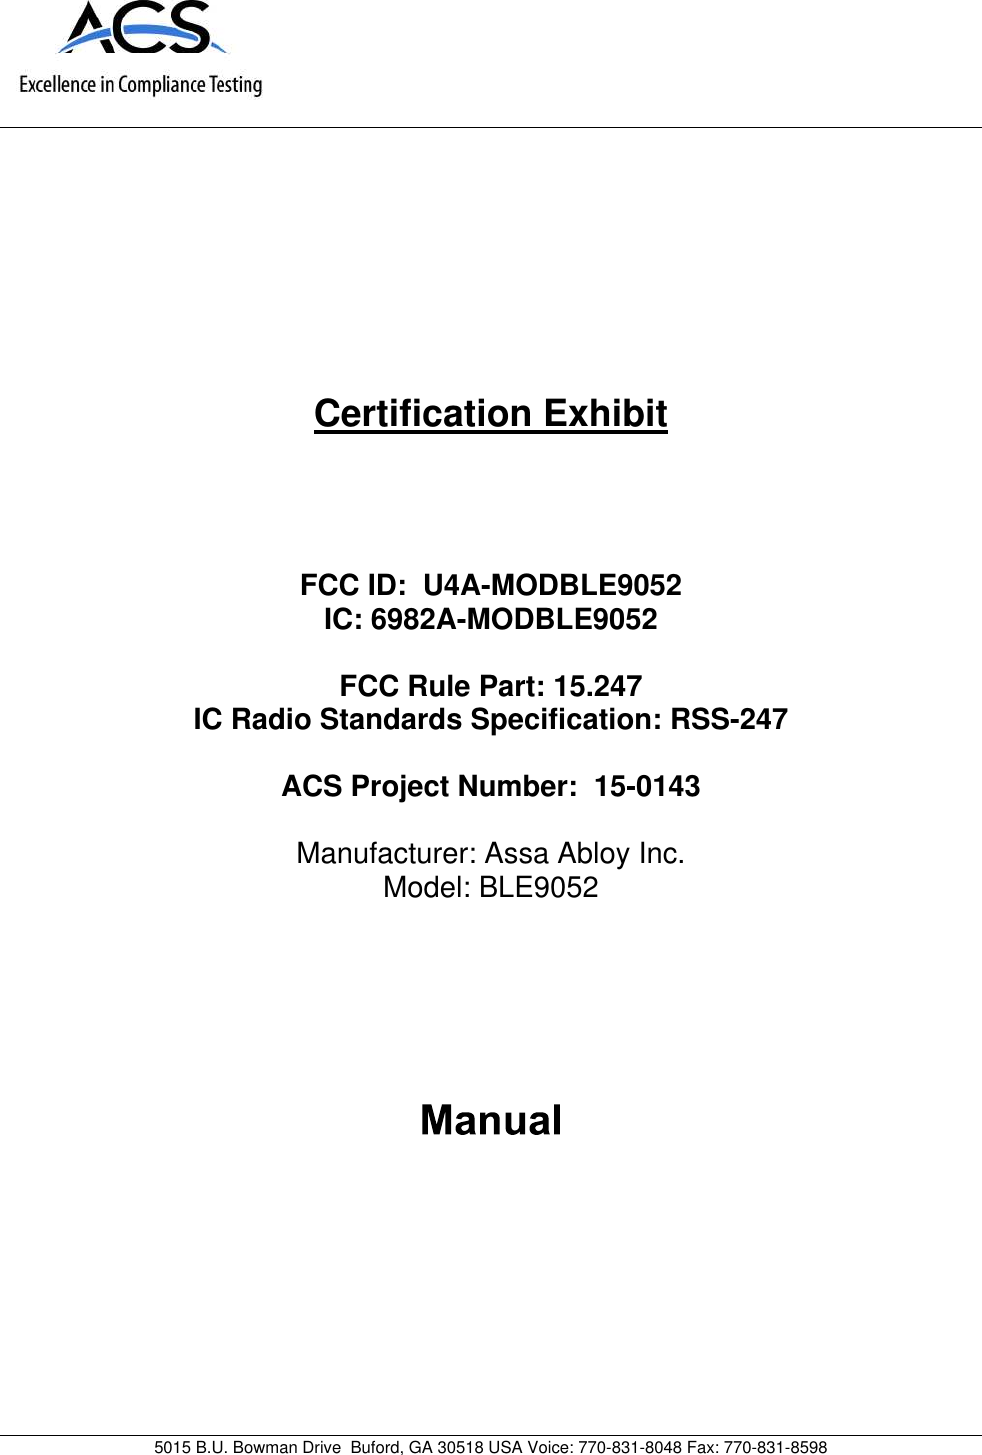 5015 B.U. Bowman Drive Buford, GA 30518 USA Voice: 770-831-8048 Fax: 770-831-8598Certification ExhibitFCC ID: U4A-MODBLE9052IC: 6982A-MODBLE9052FCC Rule Part: 15.247IC Radio Standards Specification: RSS-247ACS Project Number: 15-0143Manufacturer: Assa Abloy Inc.Model: BLE9052